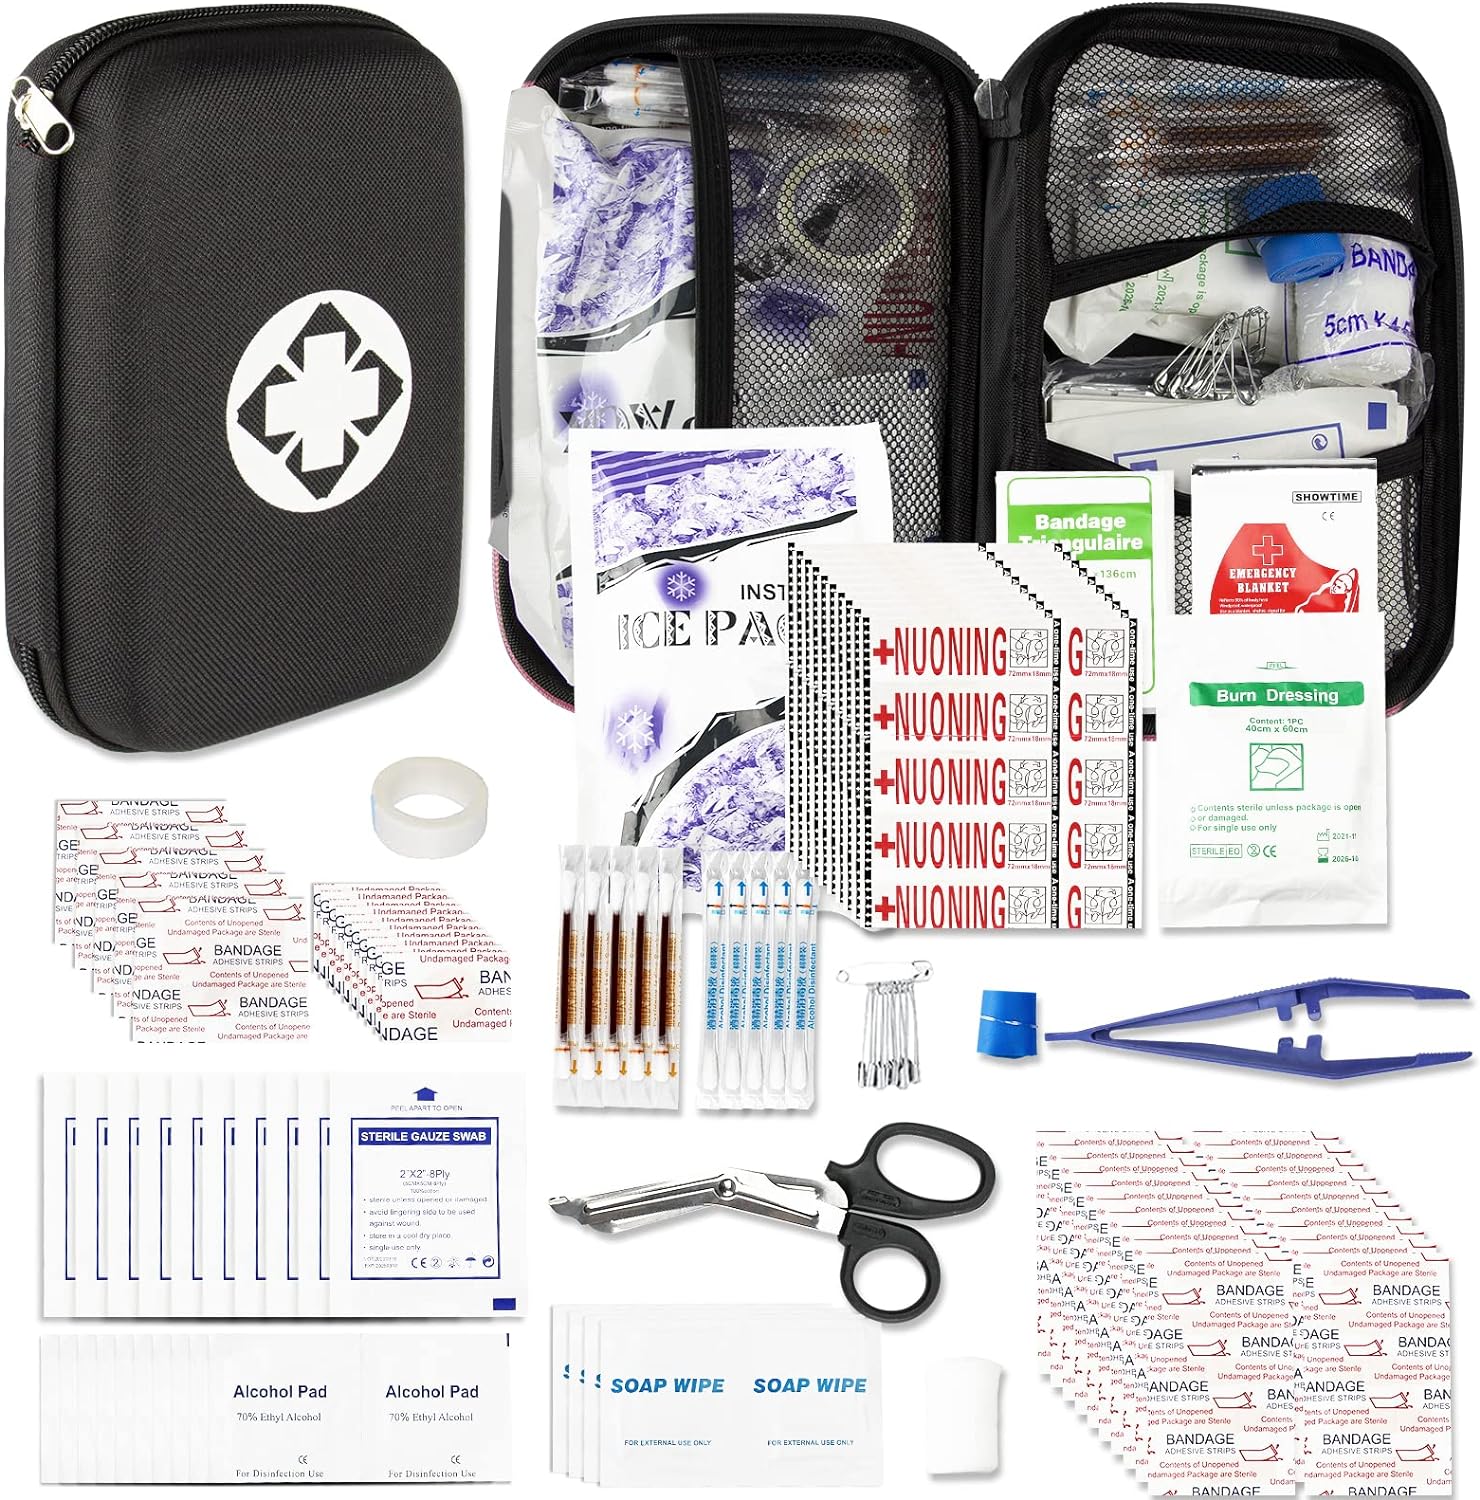 YIDERBO First Aid Kit Review